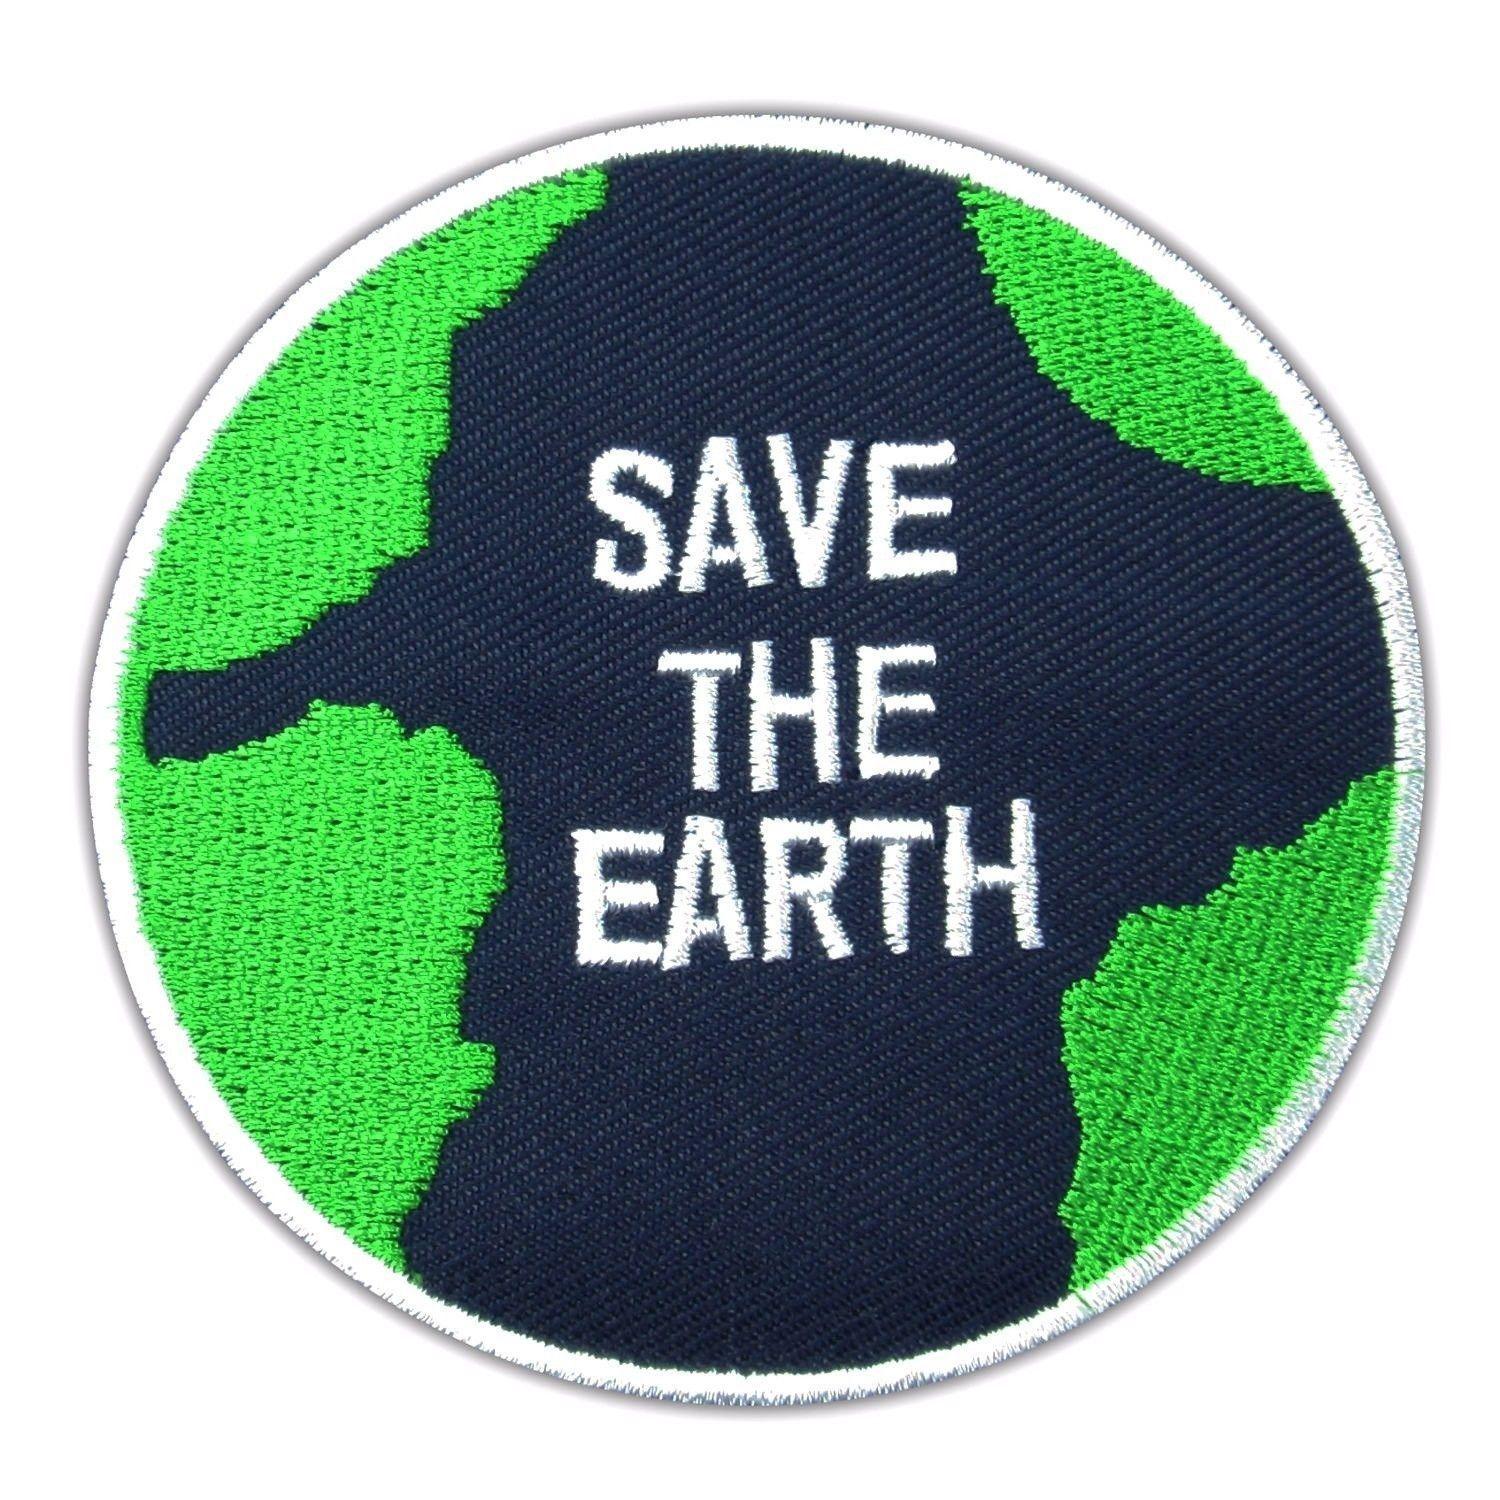 Hippie Love Logo - $2.99 - Save The Earth Love Logo Embroidered Iron On Patch Hippie ...